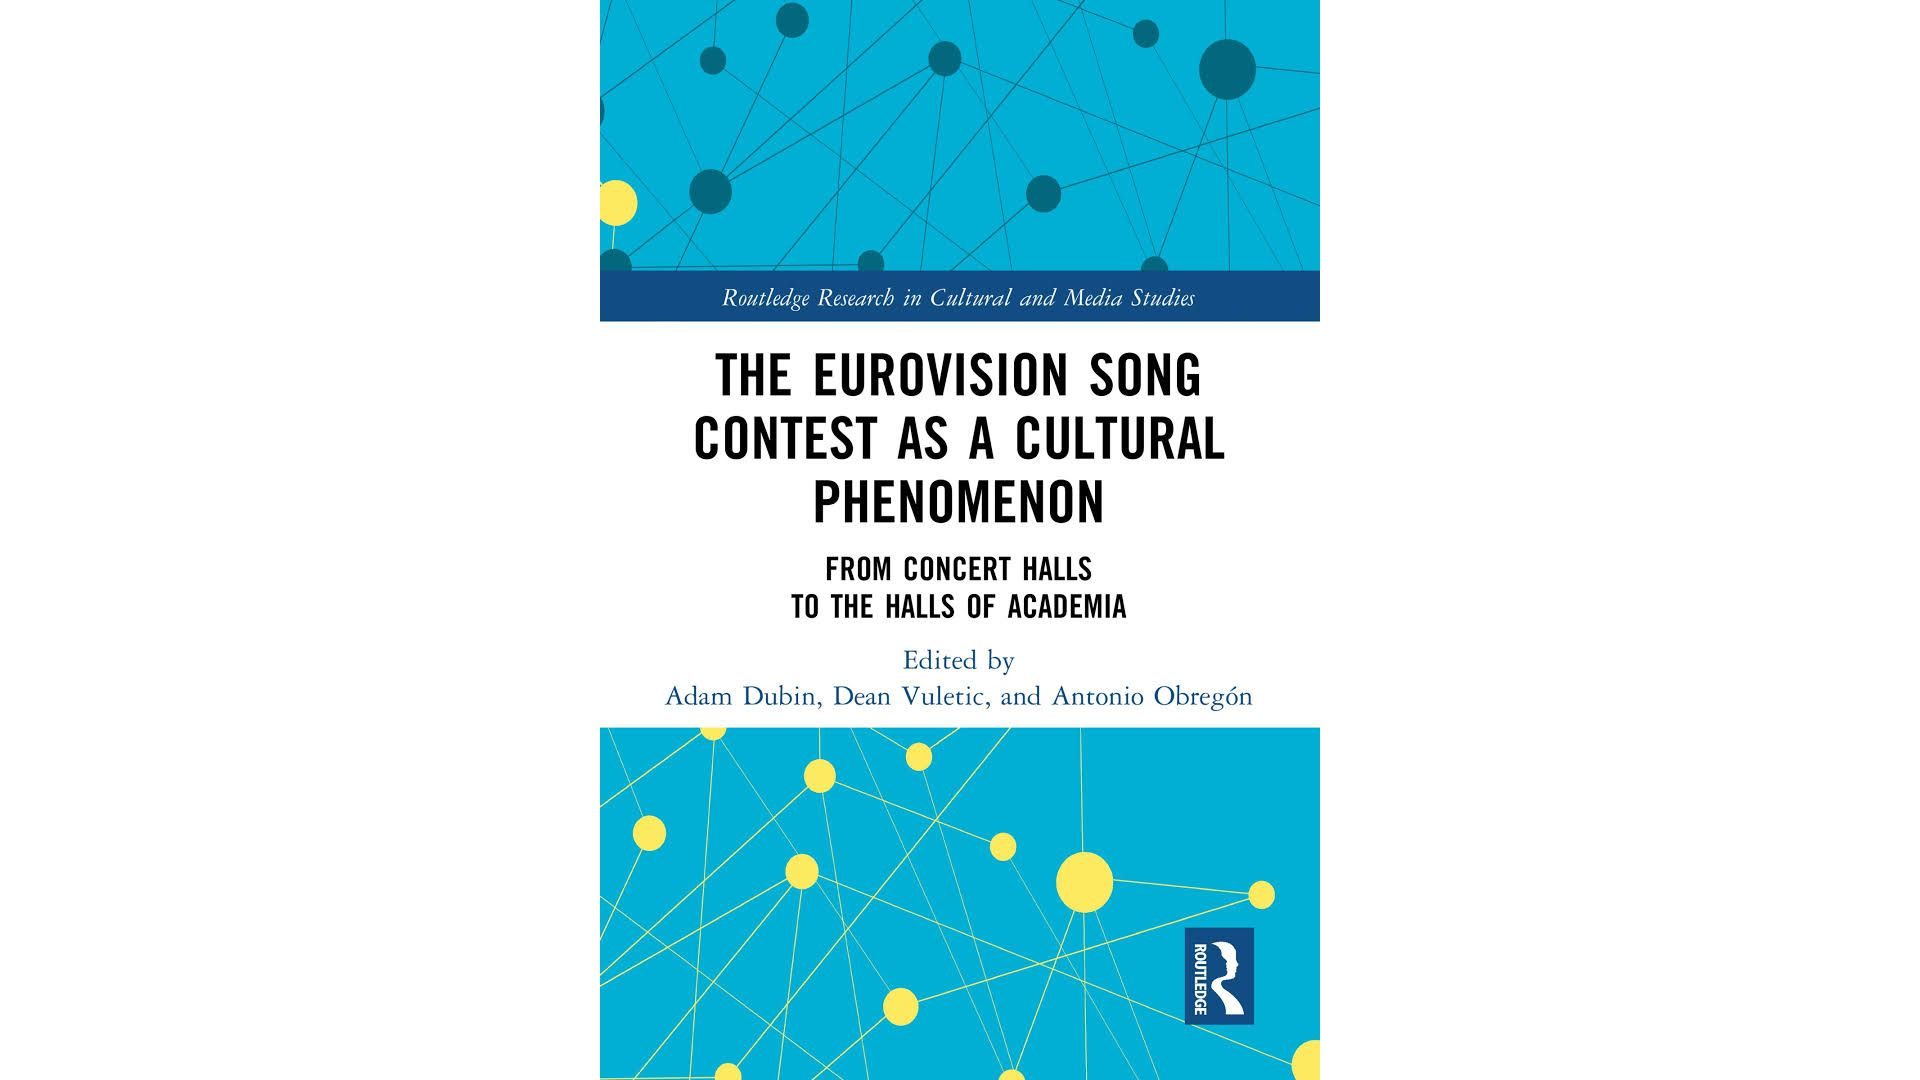 The Eurovision Song Contest as a Cultural Phenomenon From Concert Halls to the Halls of Academia